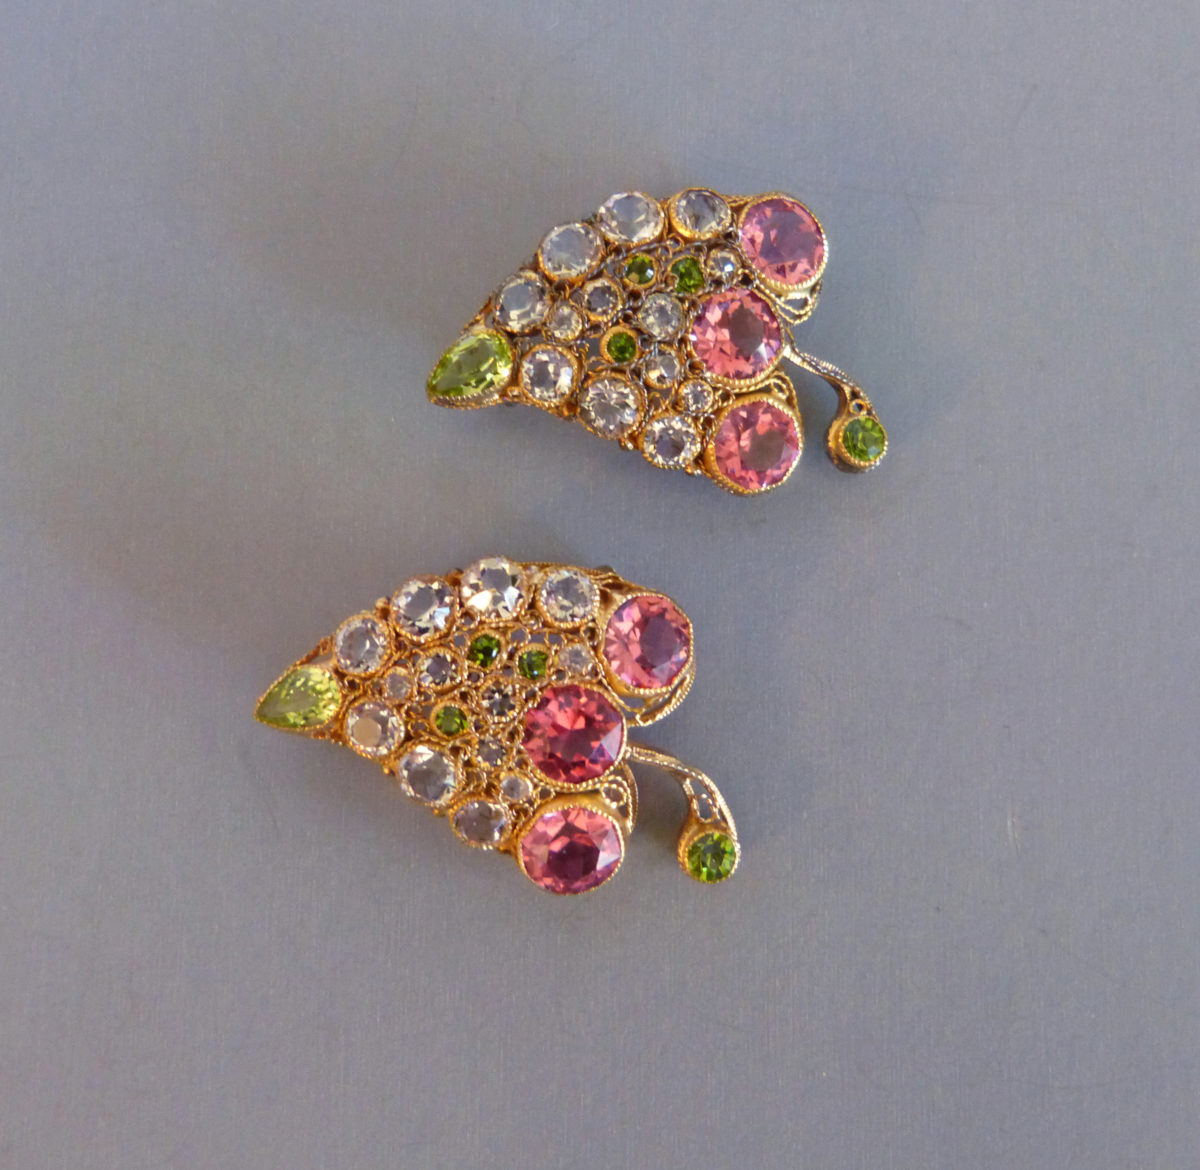 HOBE set of 2 leaf pins in pink, green and clear unfoiled rhinestones set in gold washed sterling handmade wire work filigree